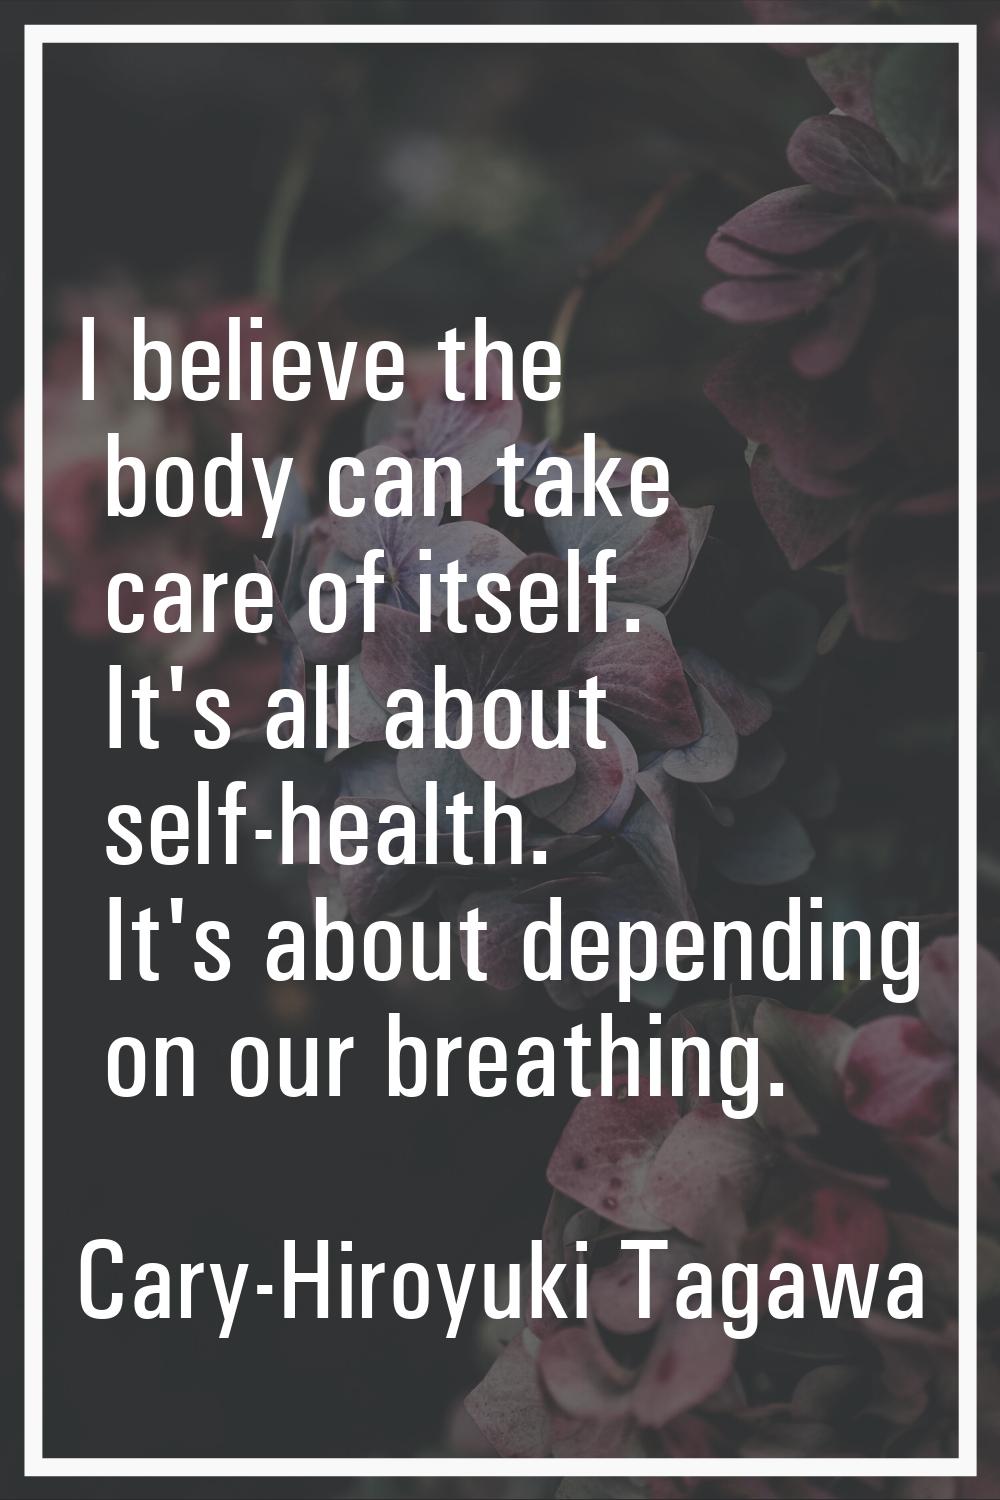 I believe the body can take care of itself. It's all about self-health. It's about depending on our